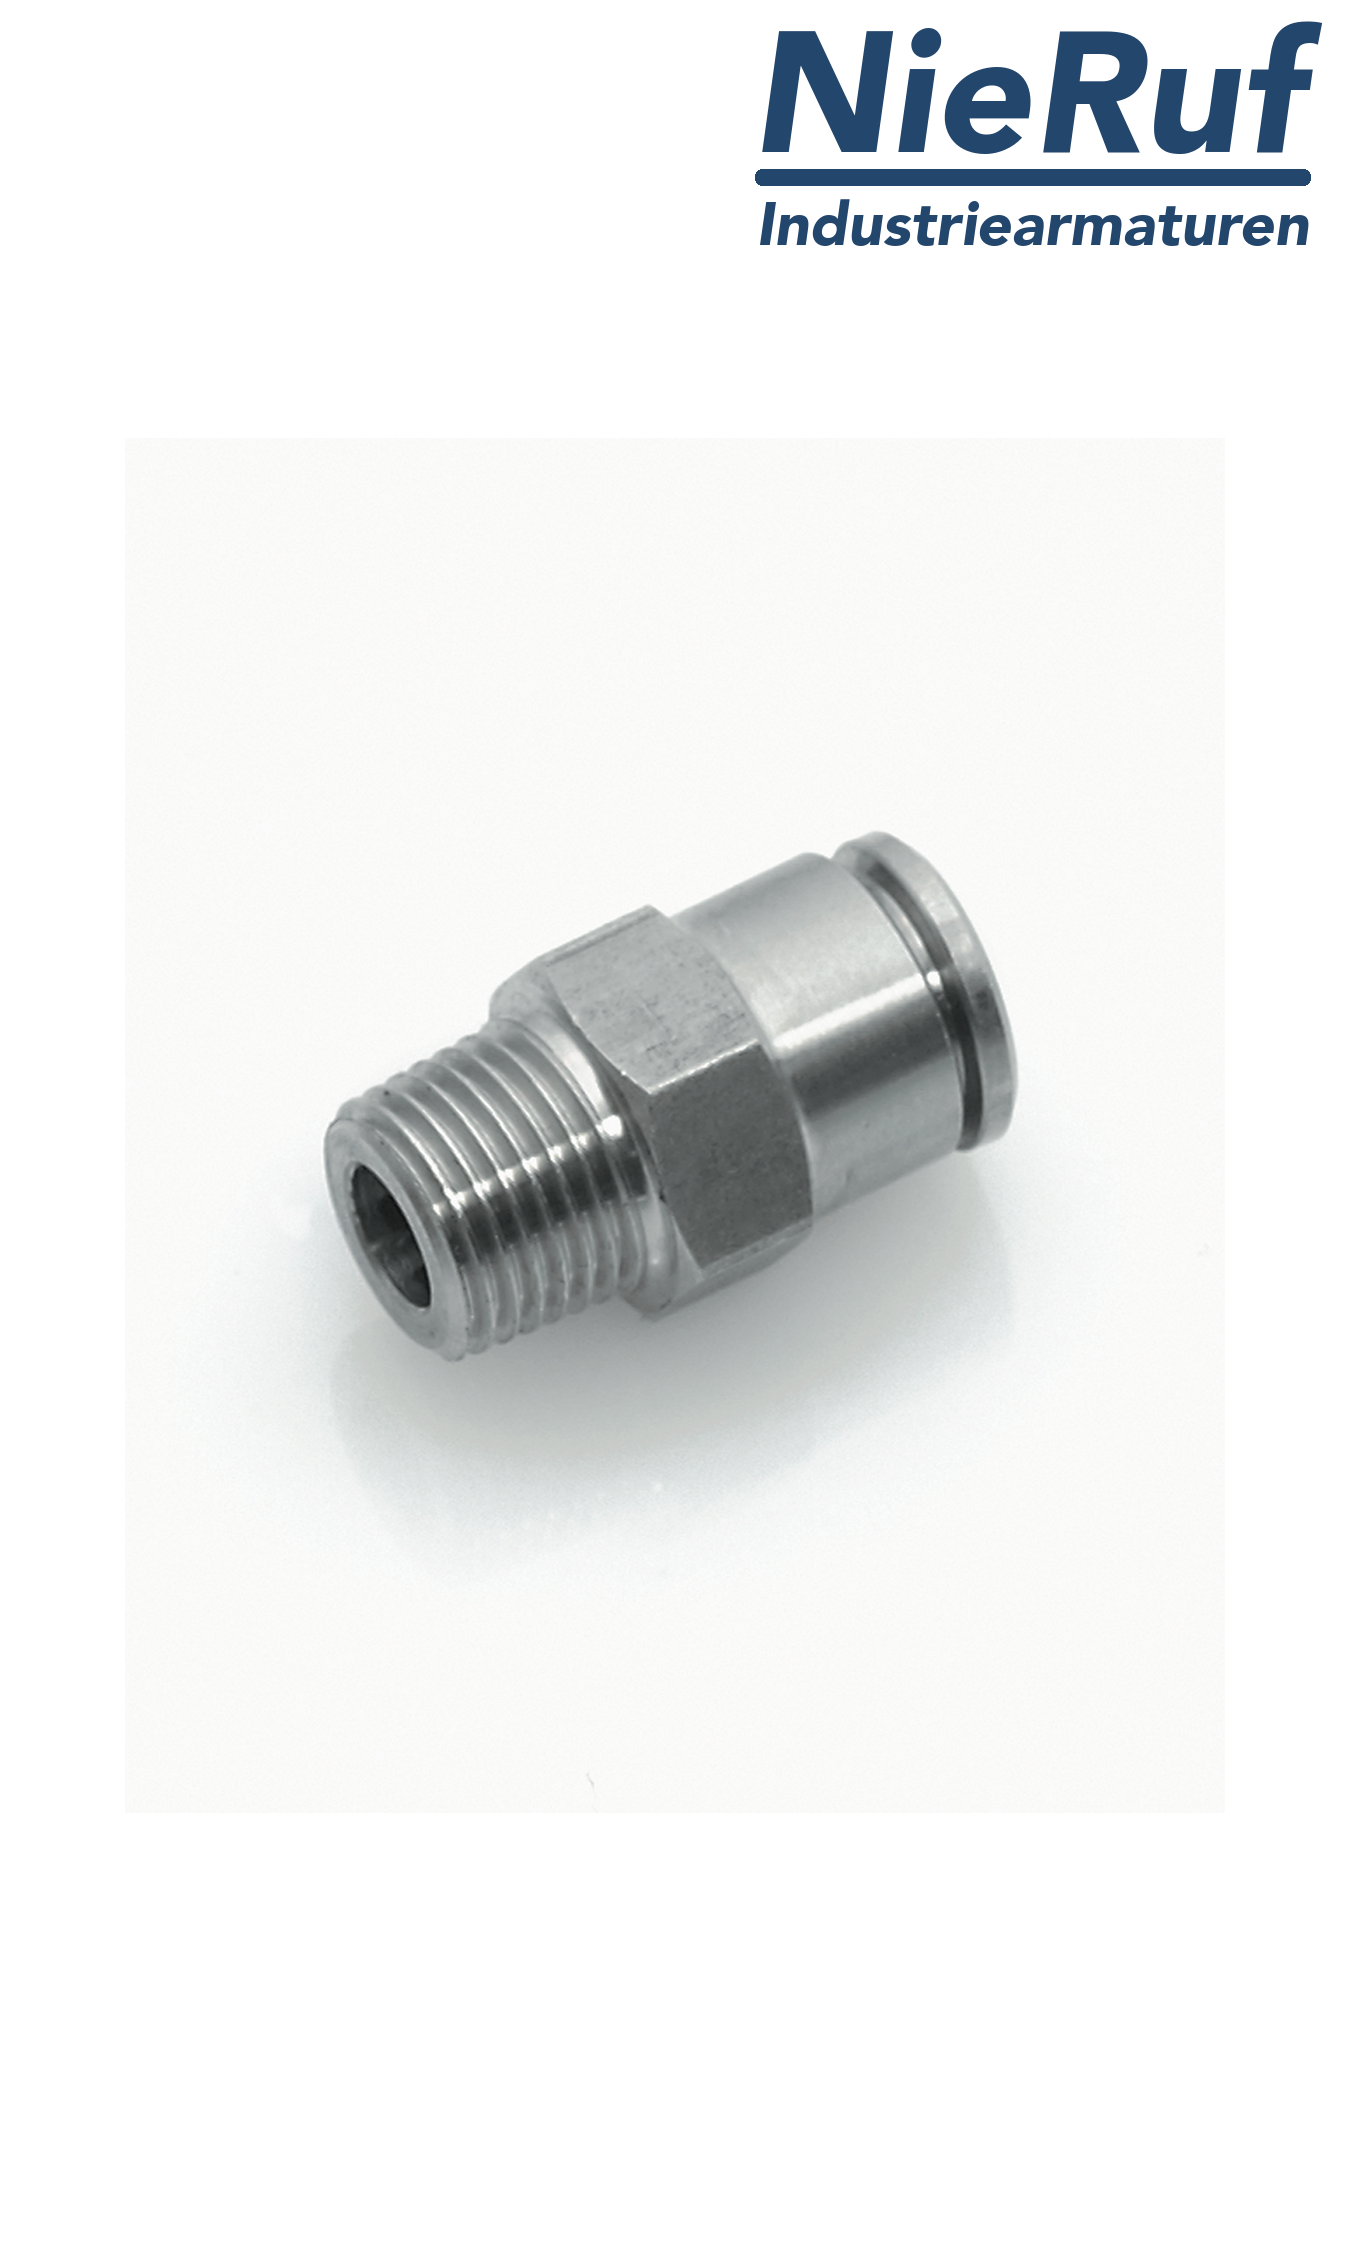 Straight male adaptor EF01 stainless steel FKM R1/4" D8mm